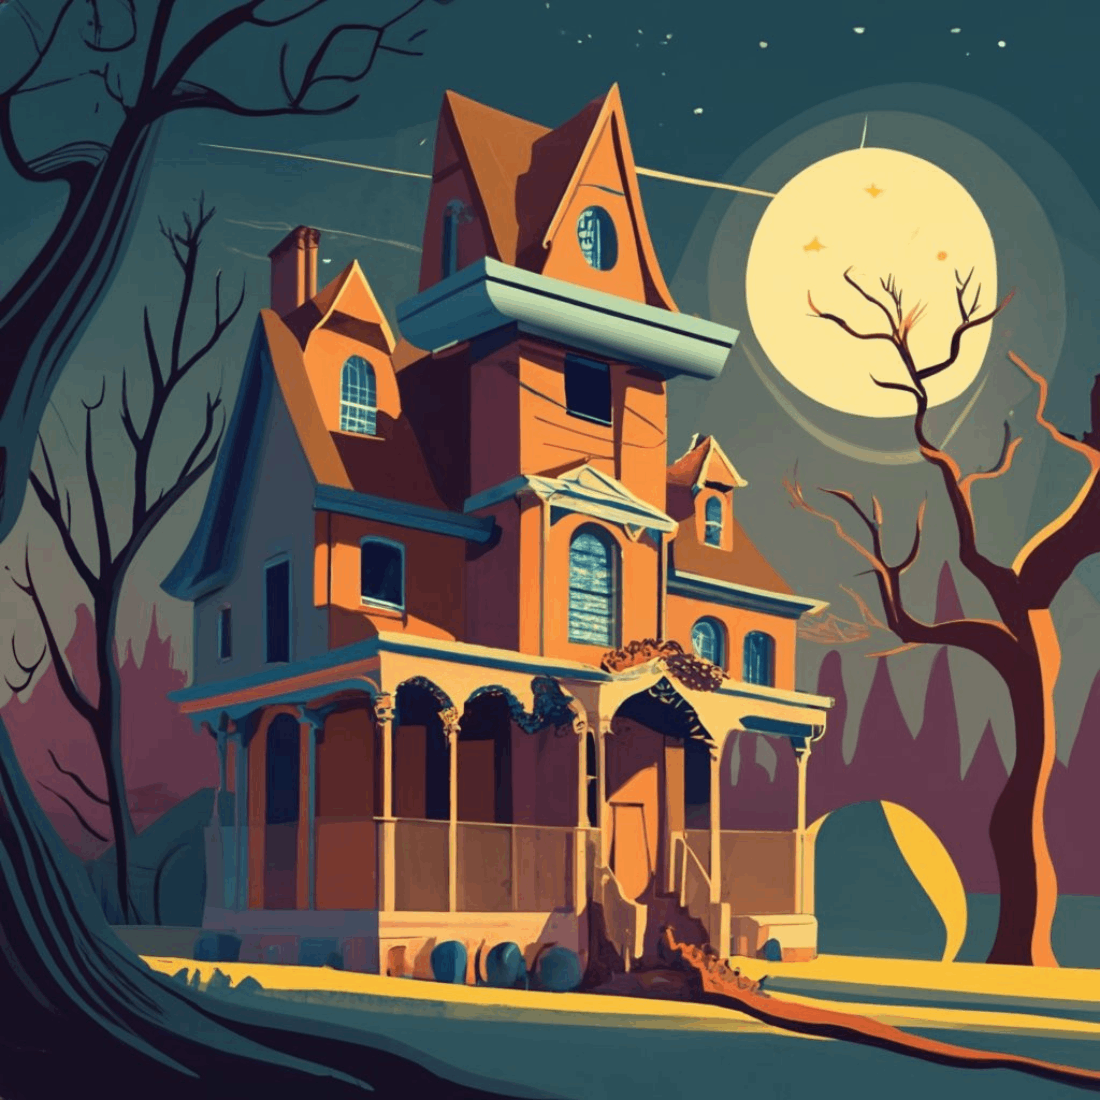 Moonlight drapes over the haunted house, casting eerie shadows that dance upon its ancient walls preview image.